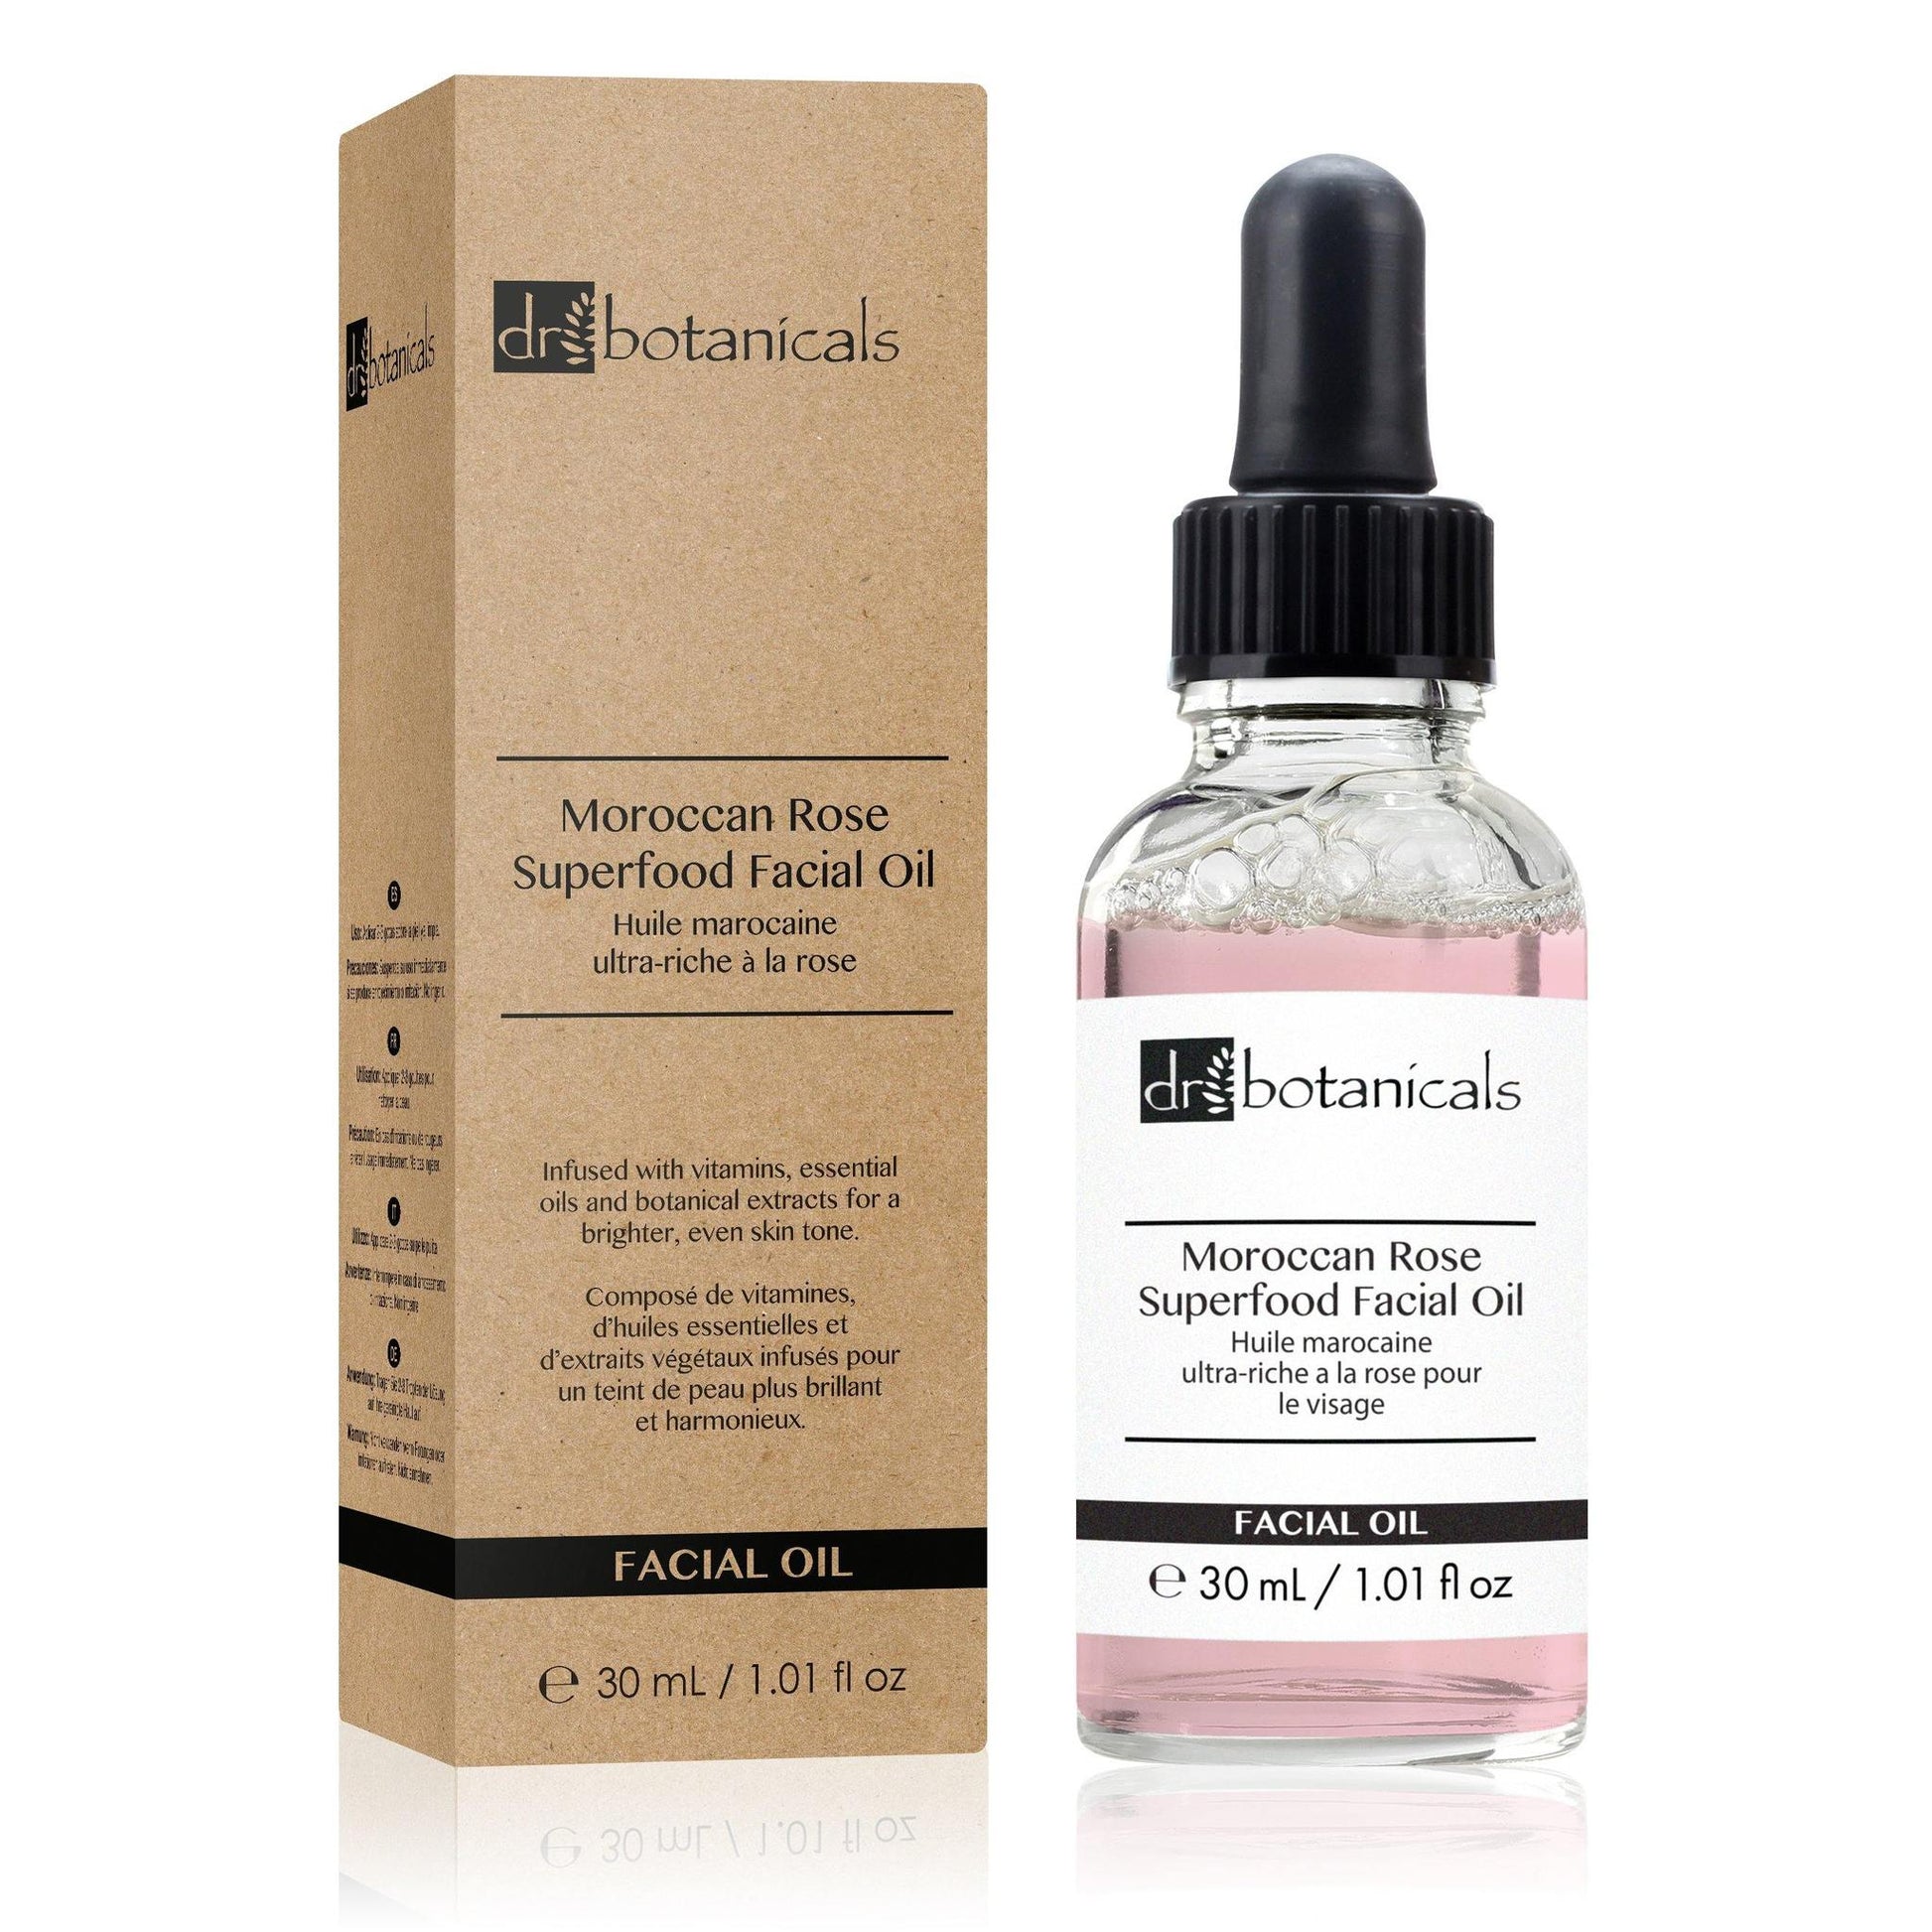 Moroccan Rose Superfood Facial Oil